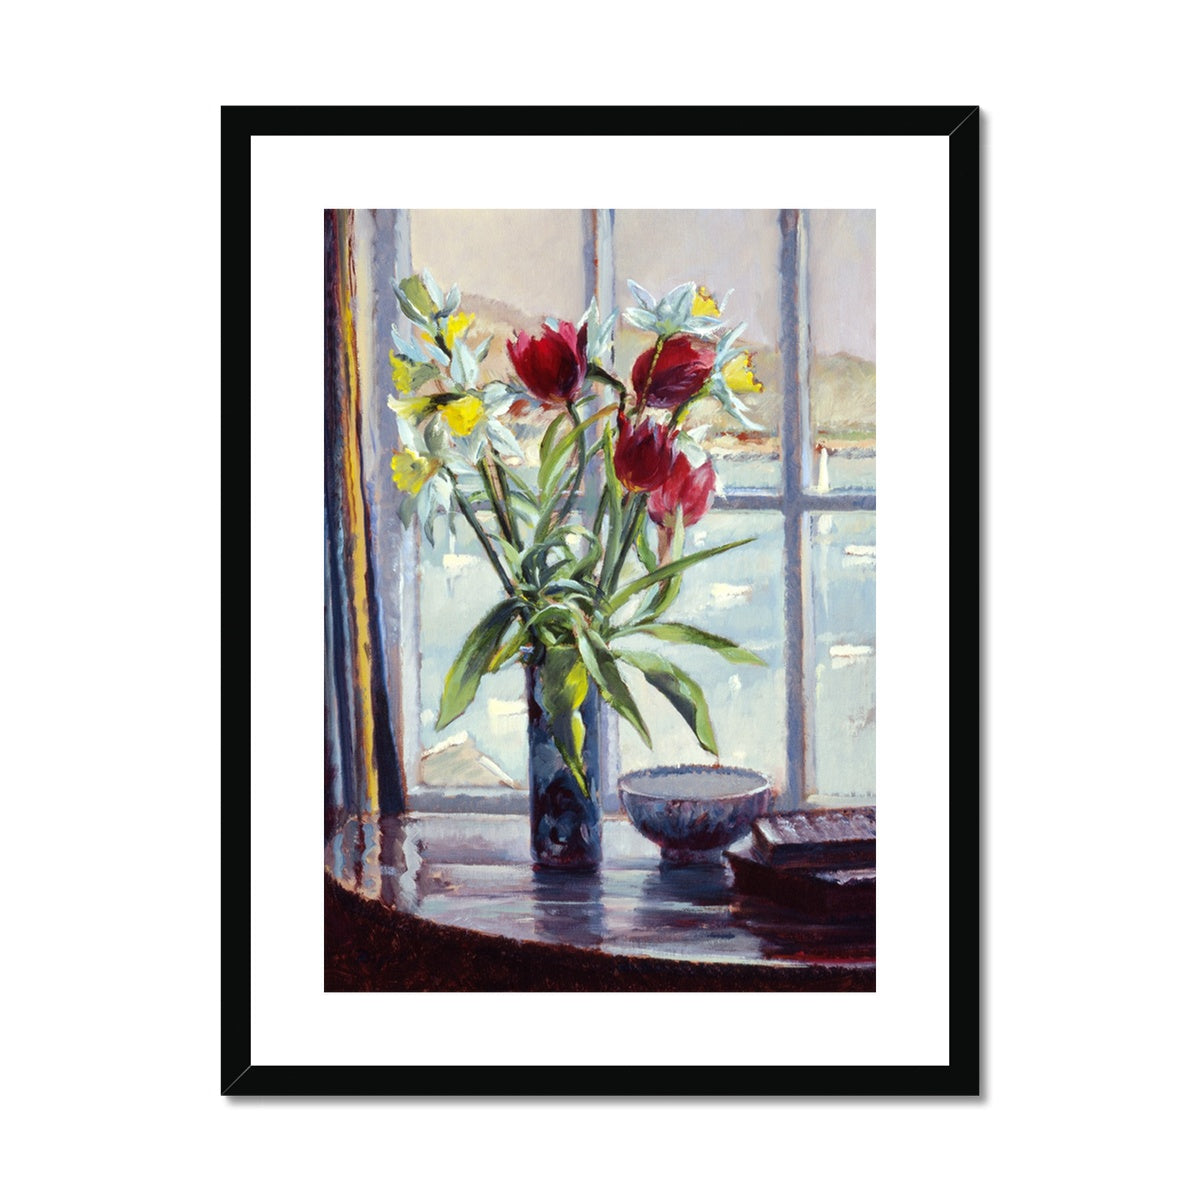 Ted Dyer Framed Open Edition Cornish Fine Art Print. &#39;Daffodils and Tulips in a Vase, Still Life&#39;. Cornwall Art Gallery